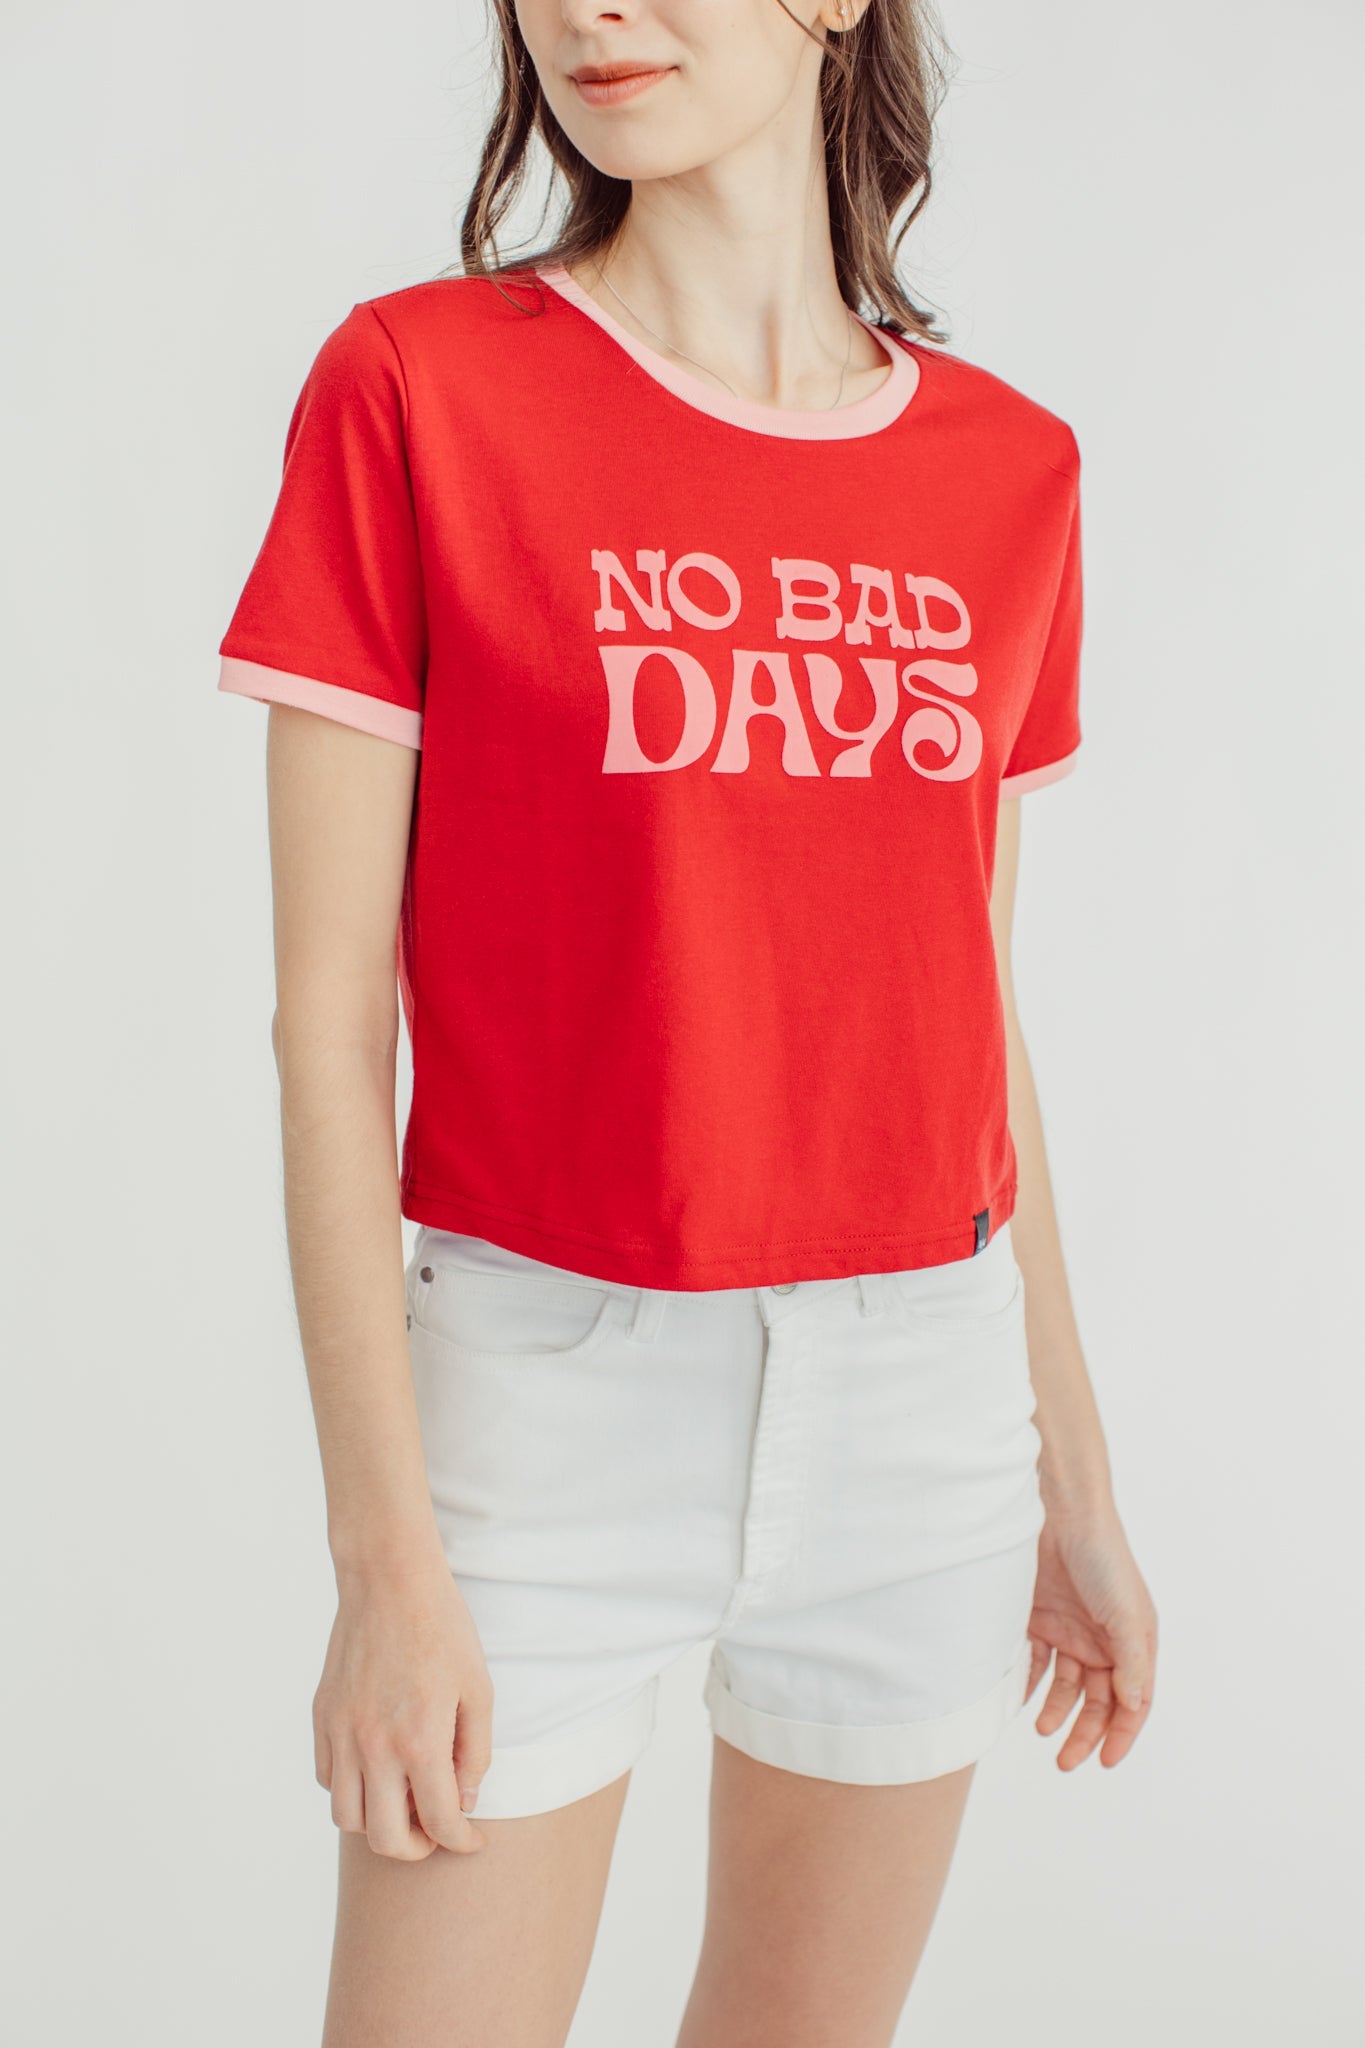 Rio Red with No Bad Days Statement on Ringer Classic Cropped Fit Tee - Mossimo PH